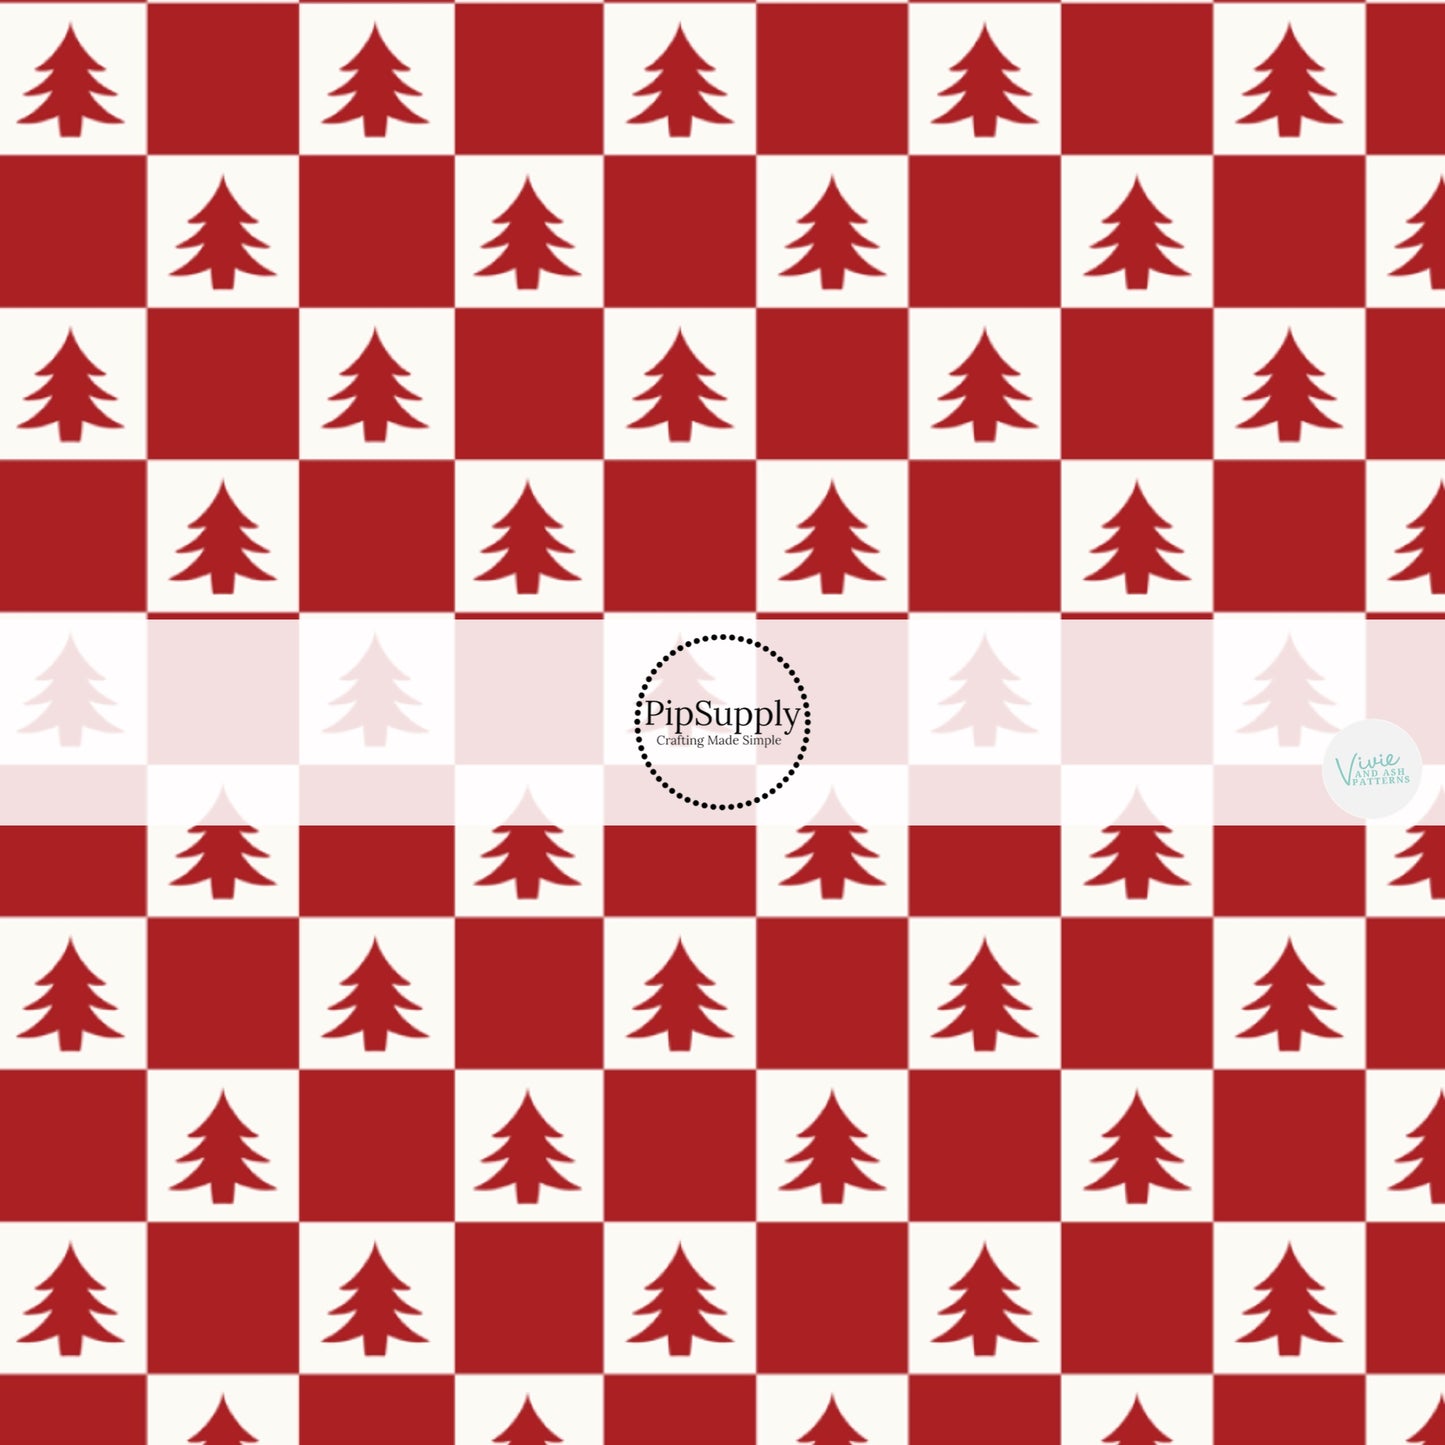 Red and white checker print and Christmas tree fabric by the yard.